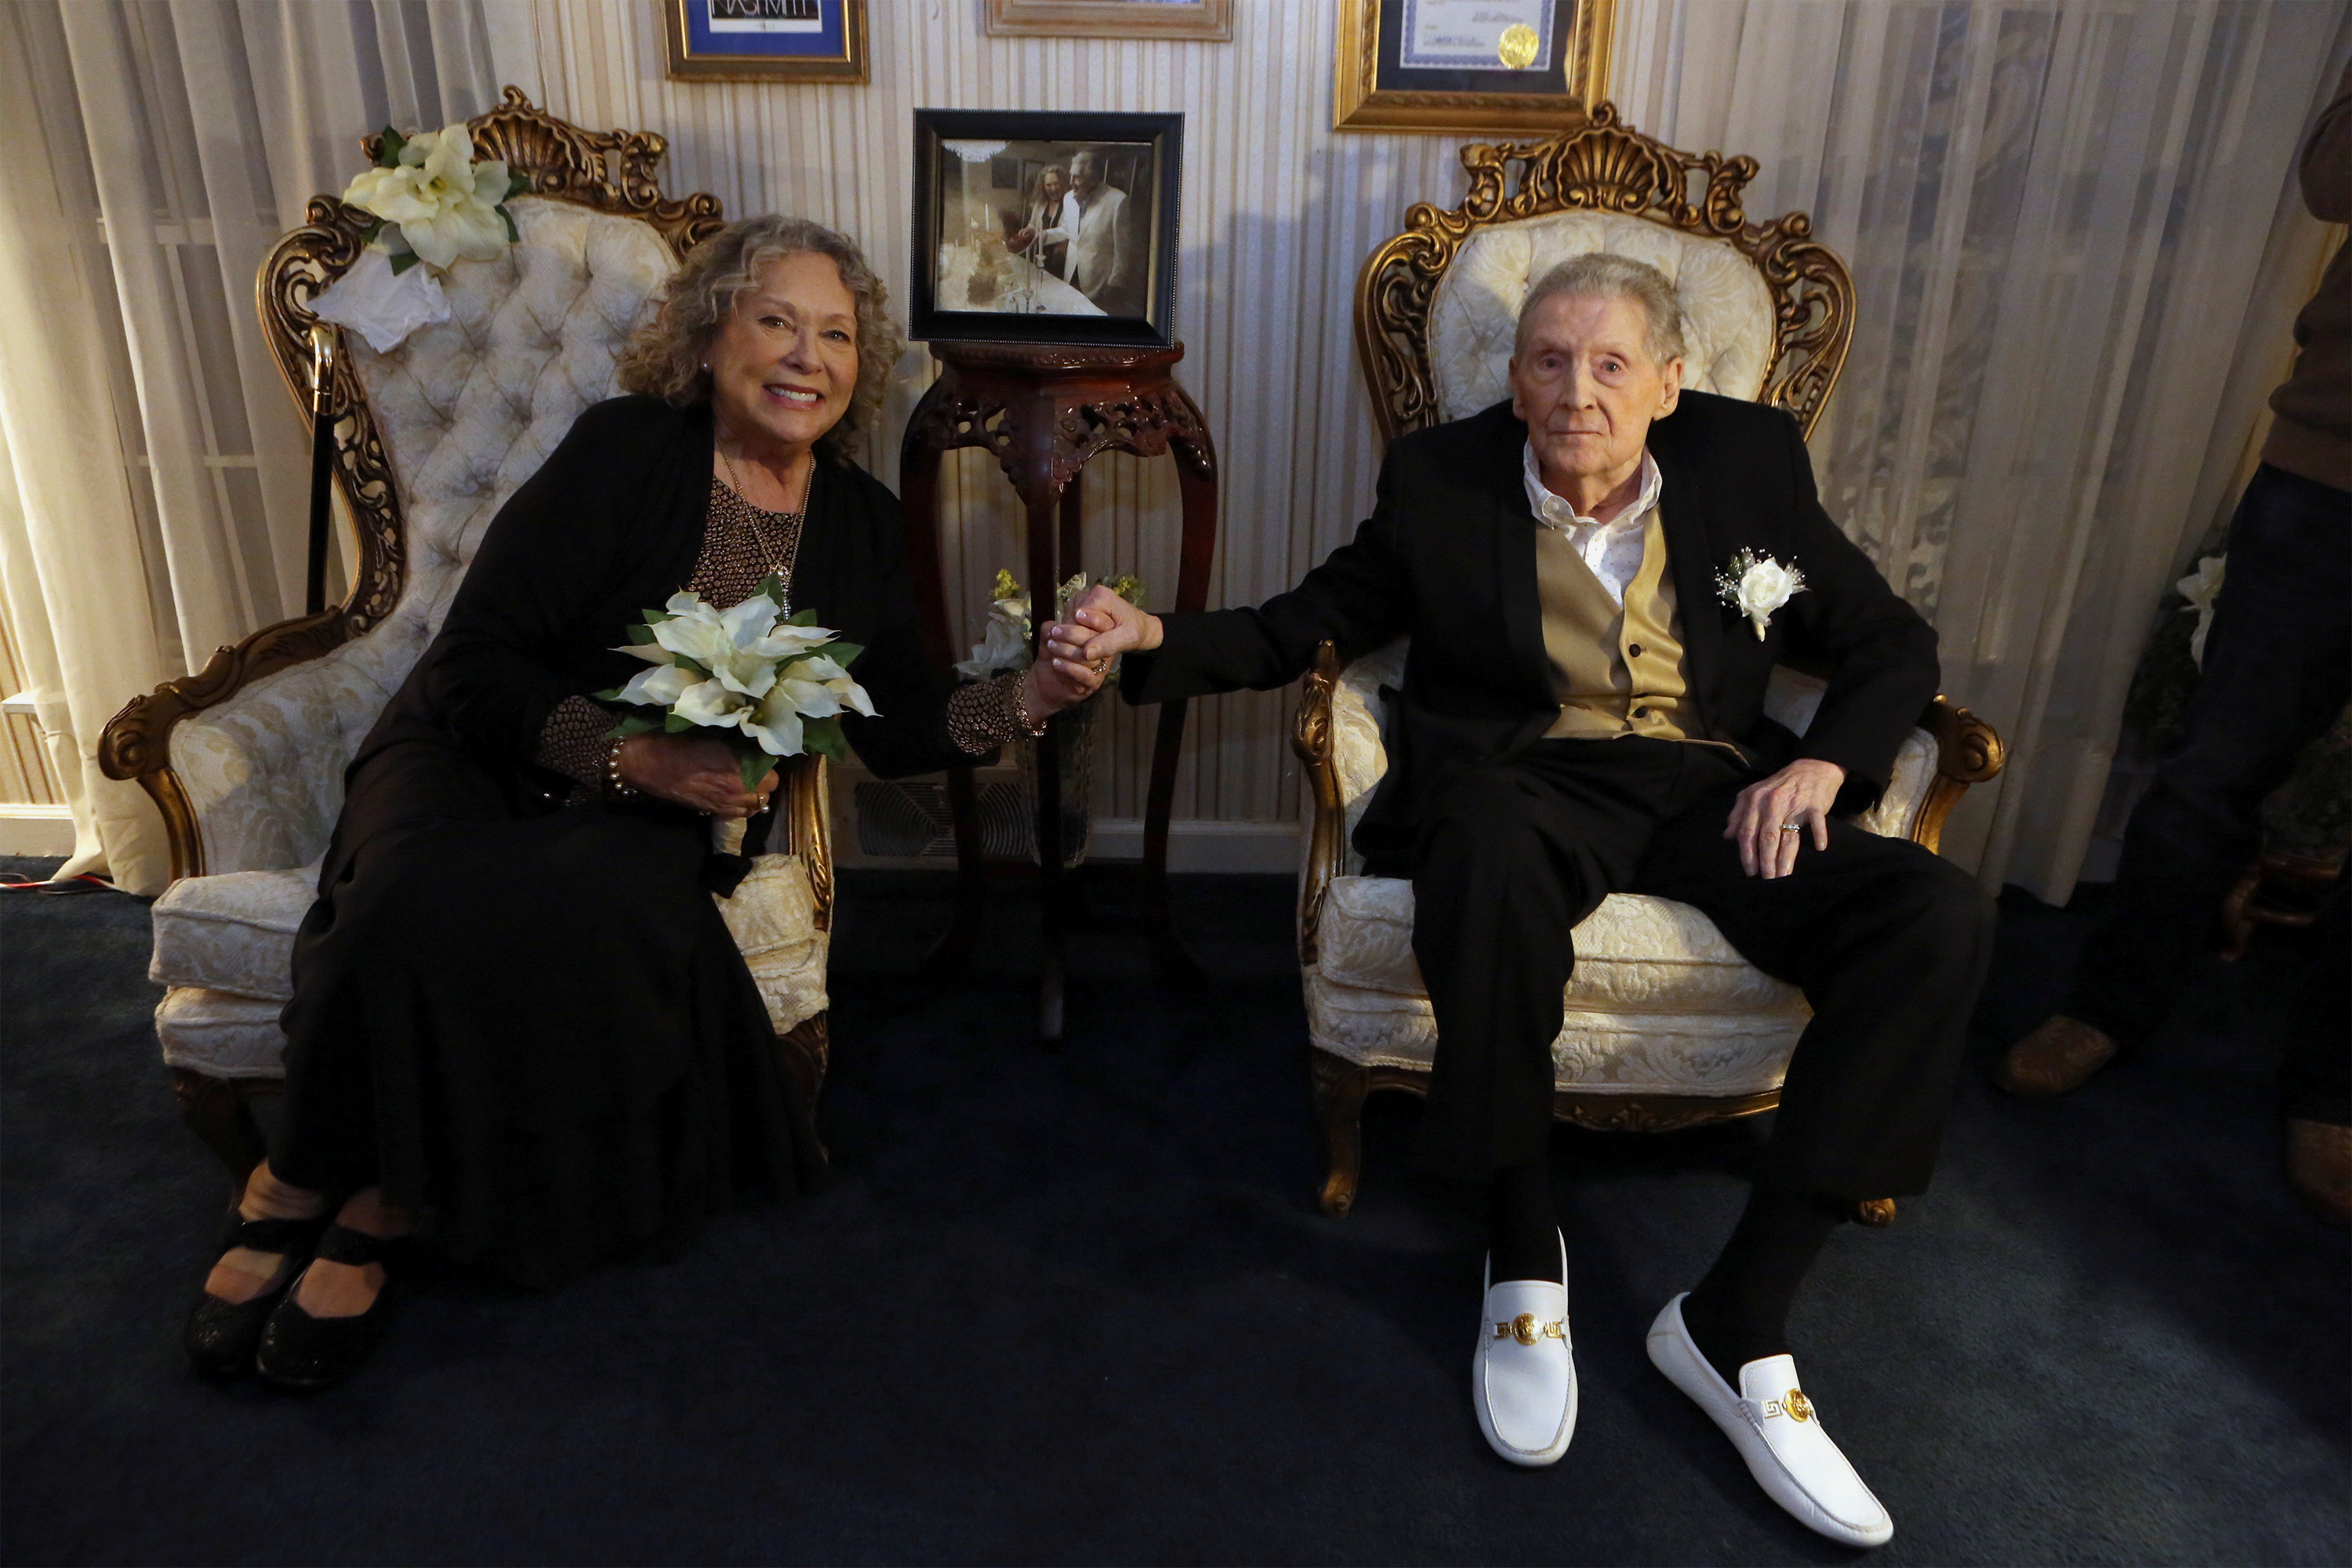 A vaccinated 85-year-old Jerry Lee Lewis renews marriage vows with 7th wife Judith at his ranch in Nesbit